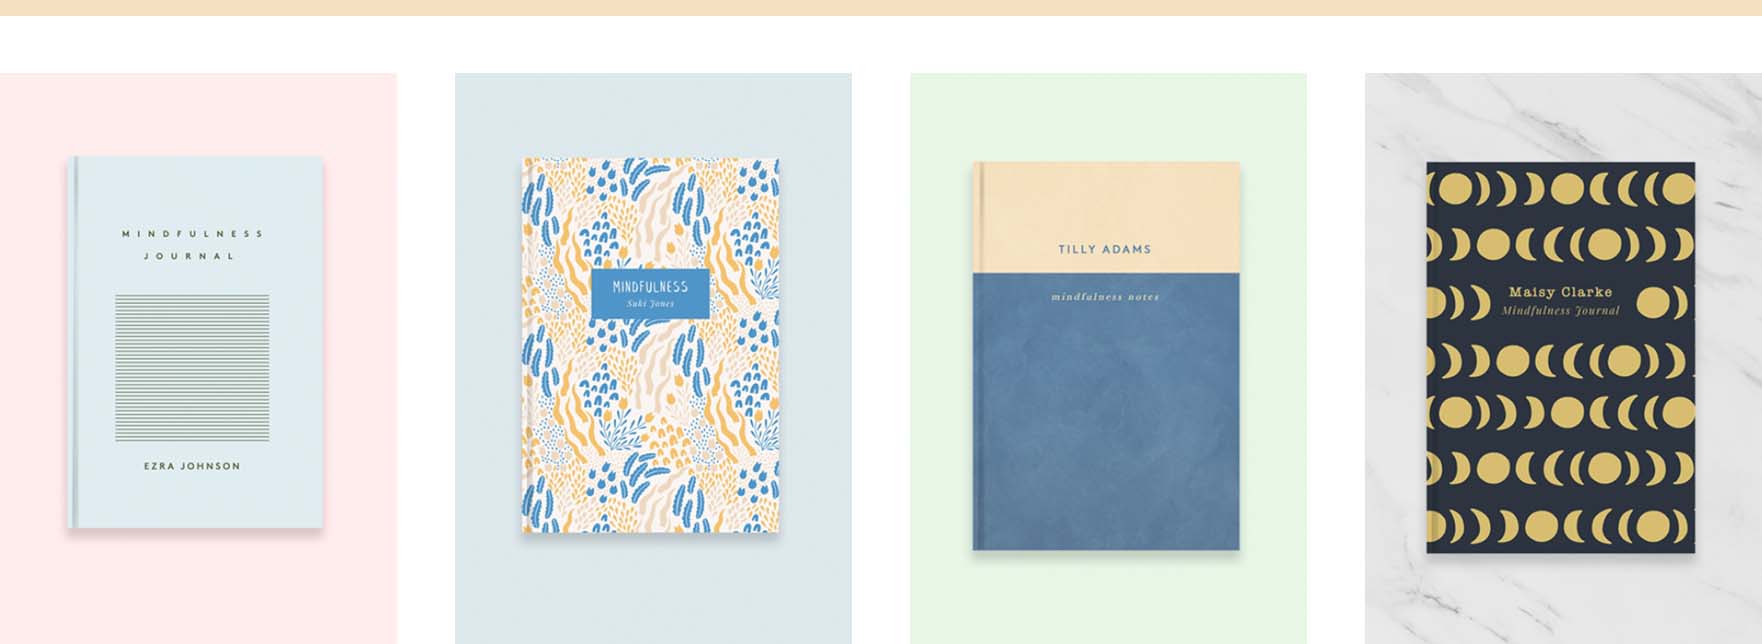 Four examples of Mindfulness Journal covers with lines, abstract and moon patterns